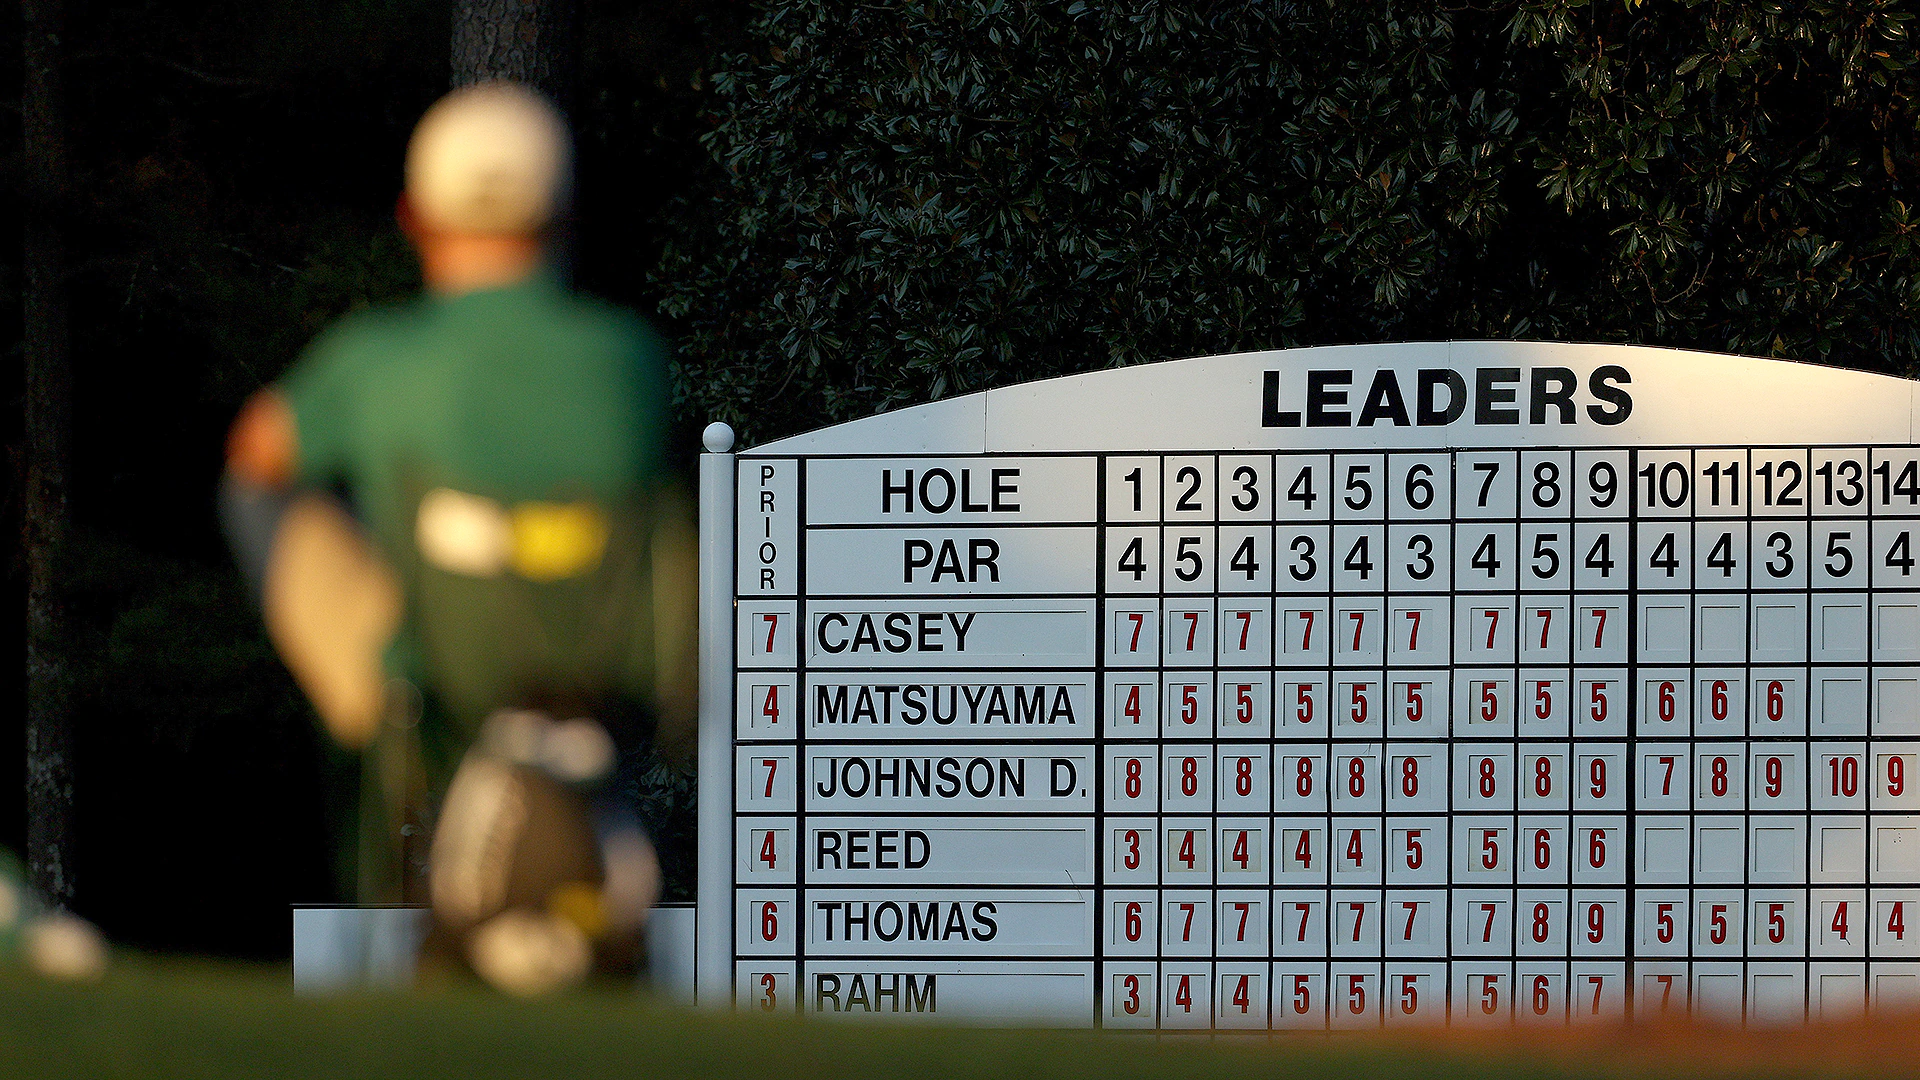 Round 2 extends into Saturday, with 10:30 a.m. ET scheduled start for Rd. 3 of Masters